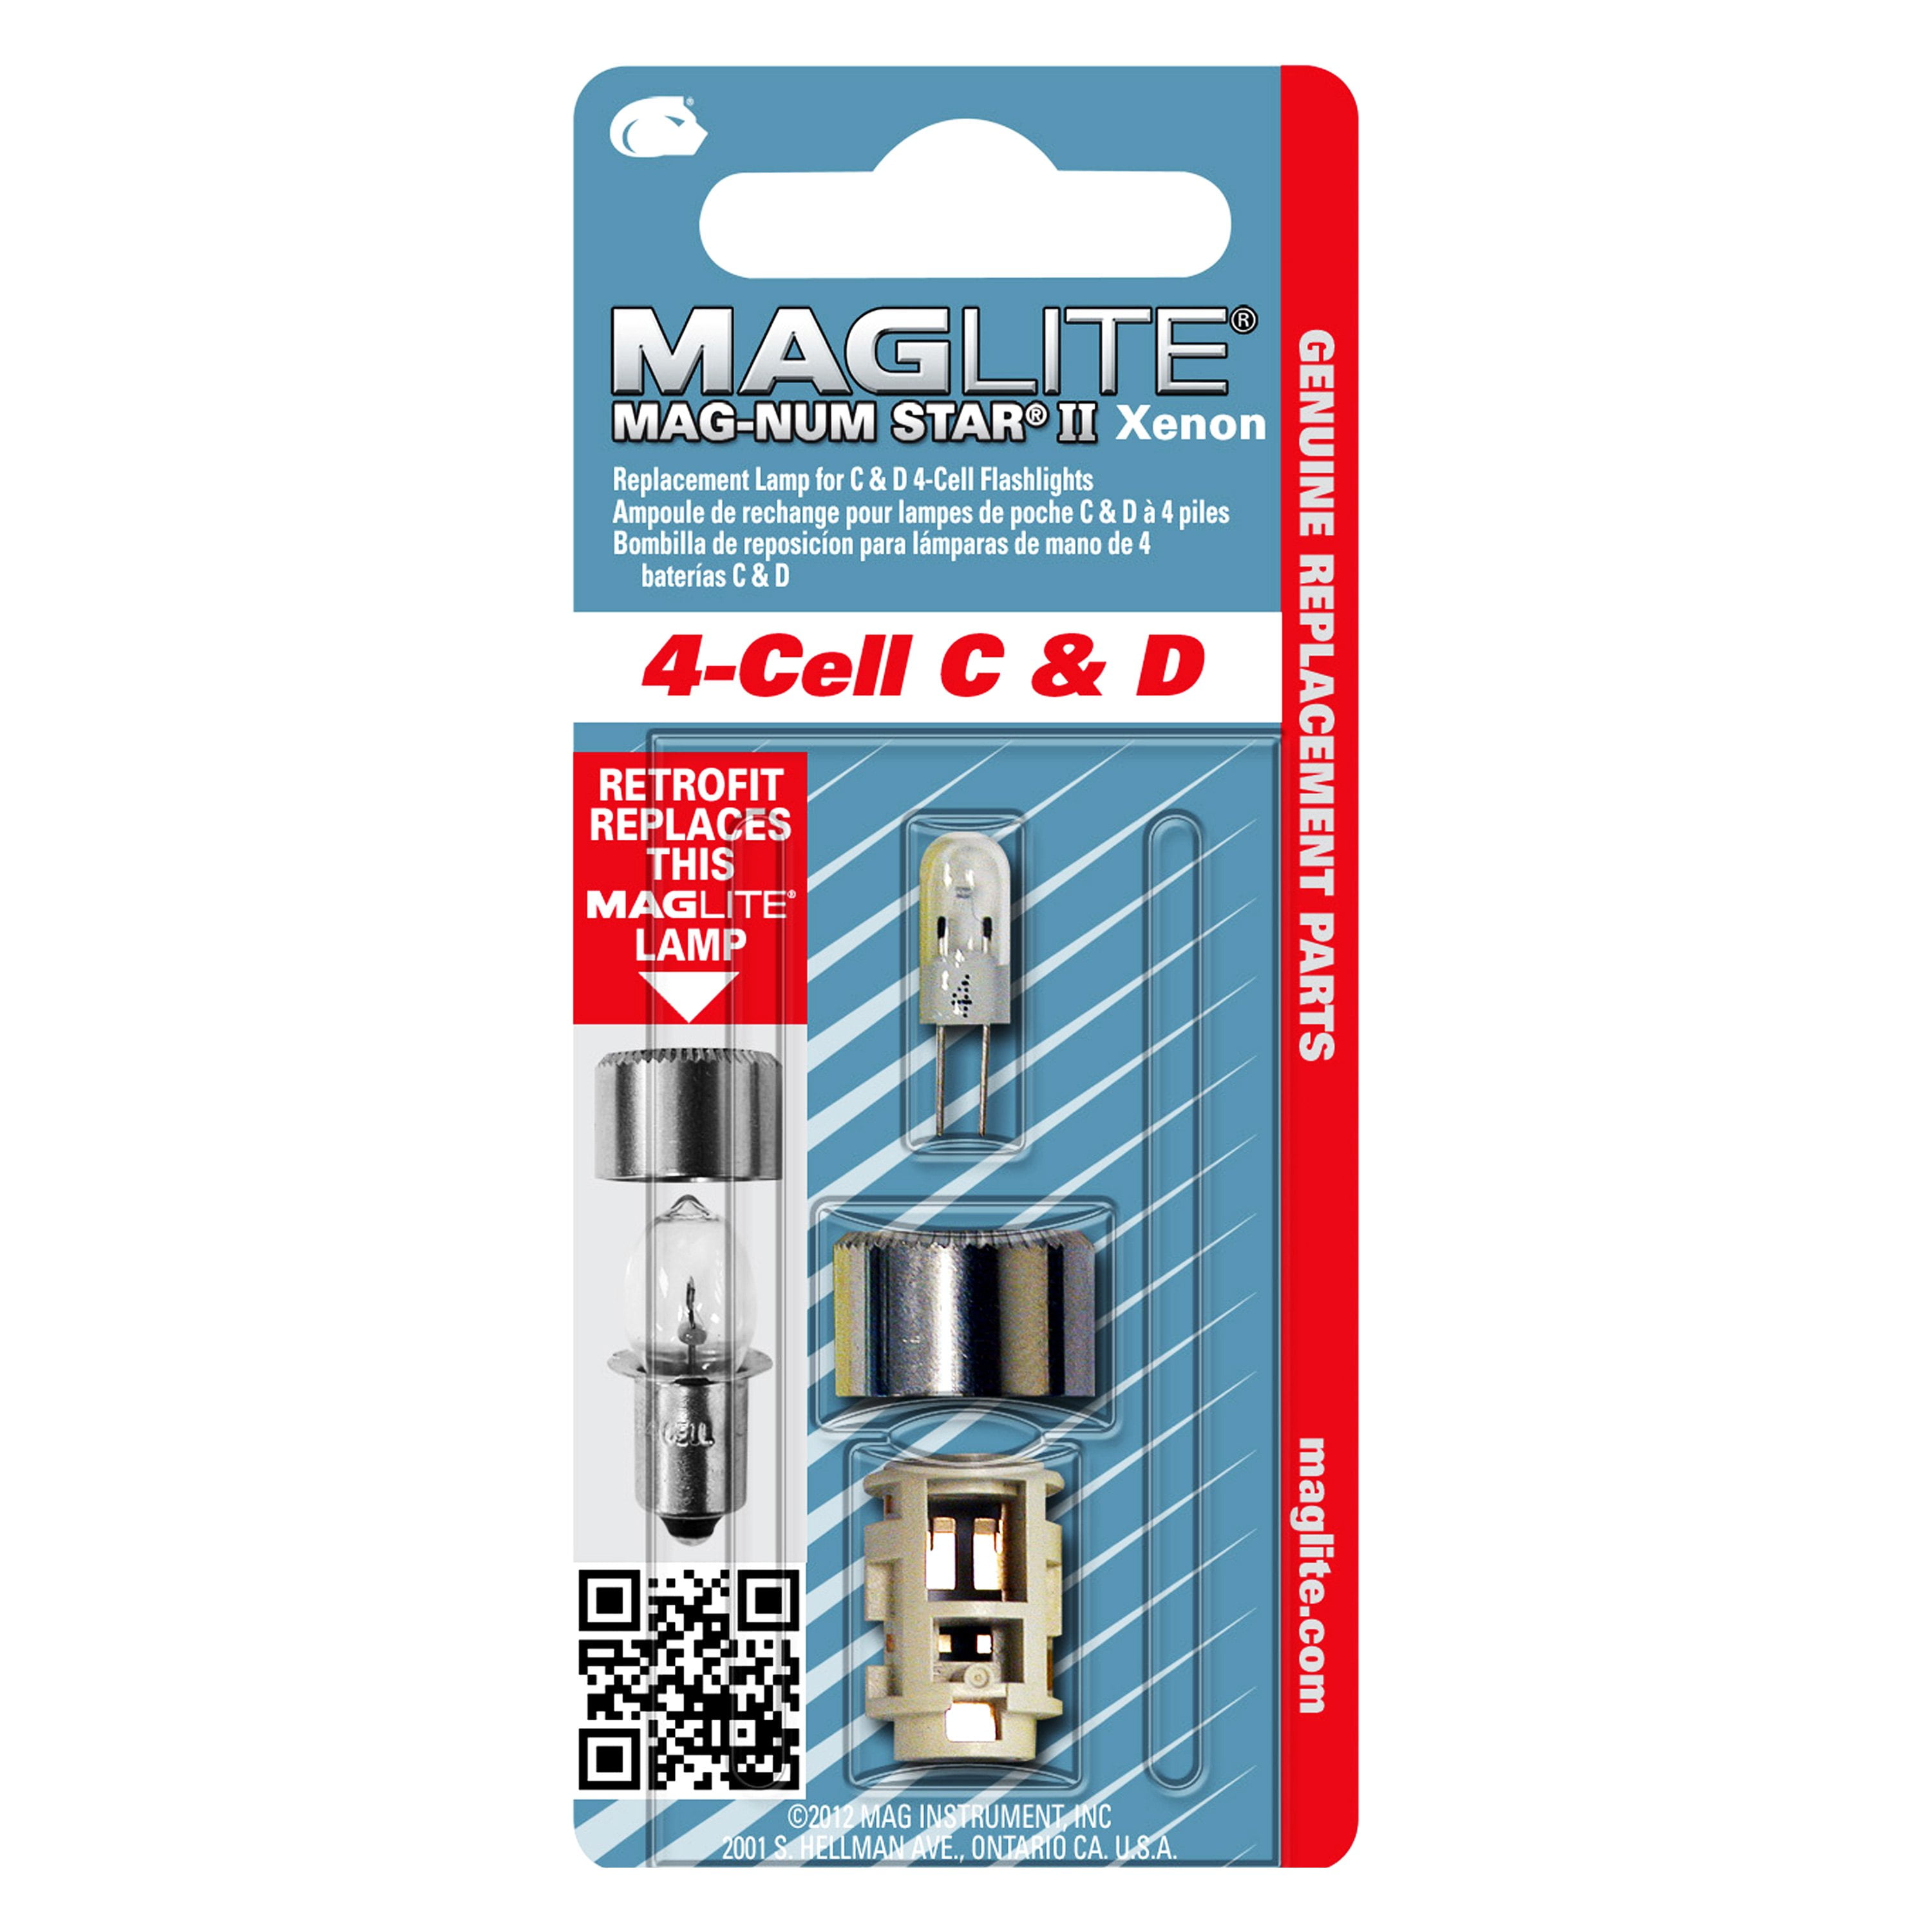 MagLite LMXA401 Magnum Star Xenon Light Bulb Upgrade for MagLite 4 Cell C and D 